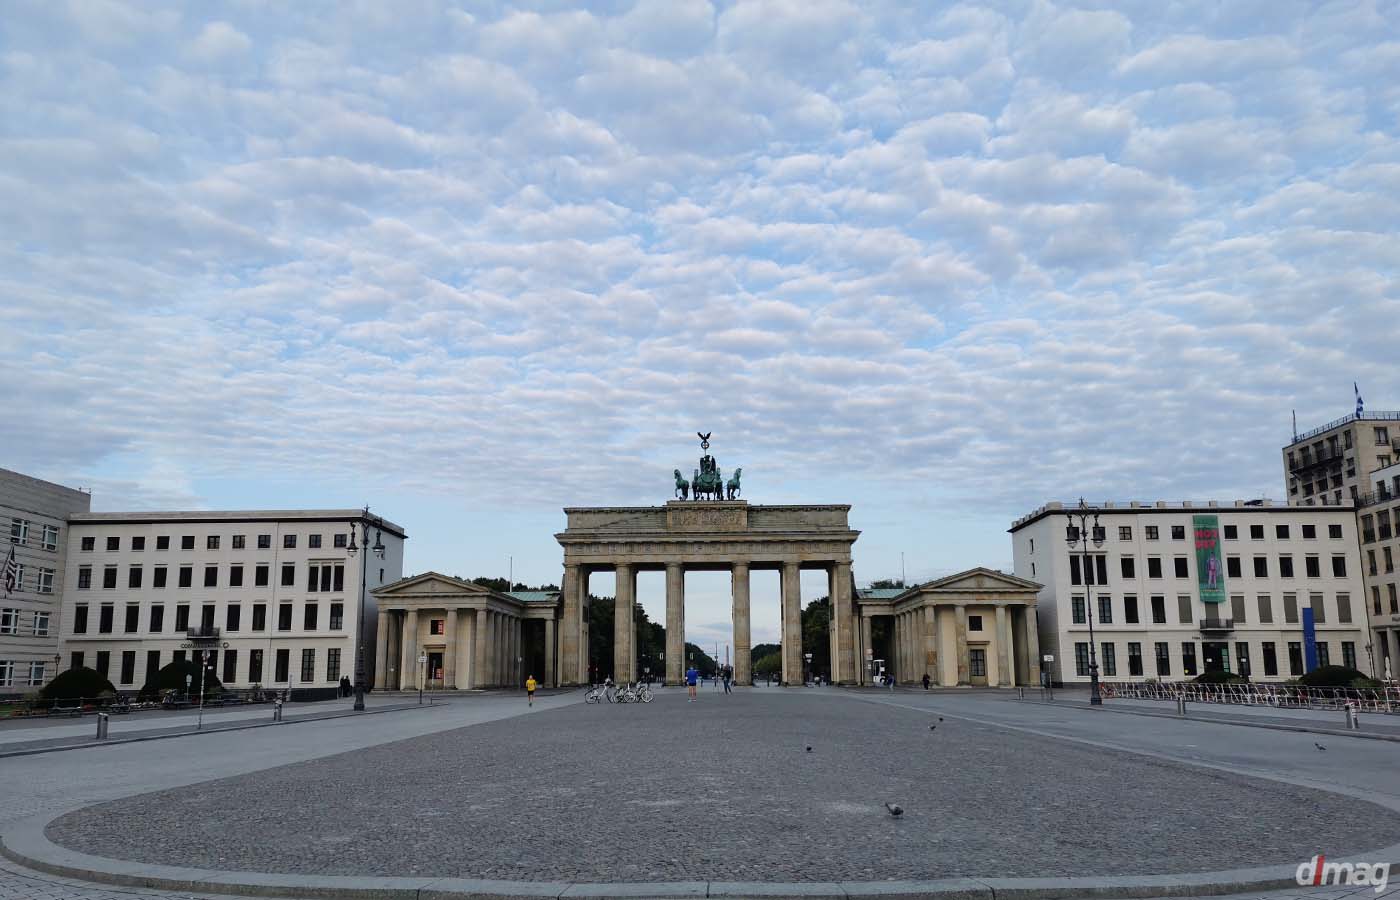 How to spend 24 hours in Berlin, Germany - dlmag